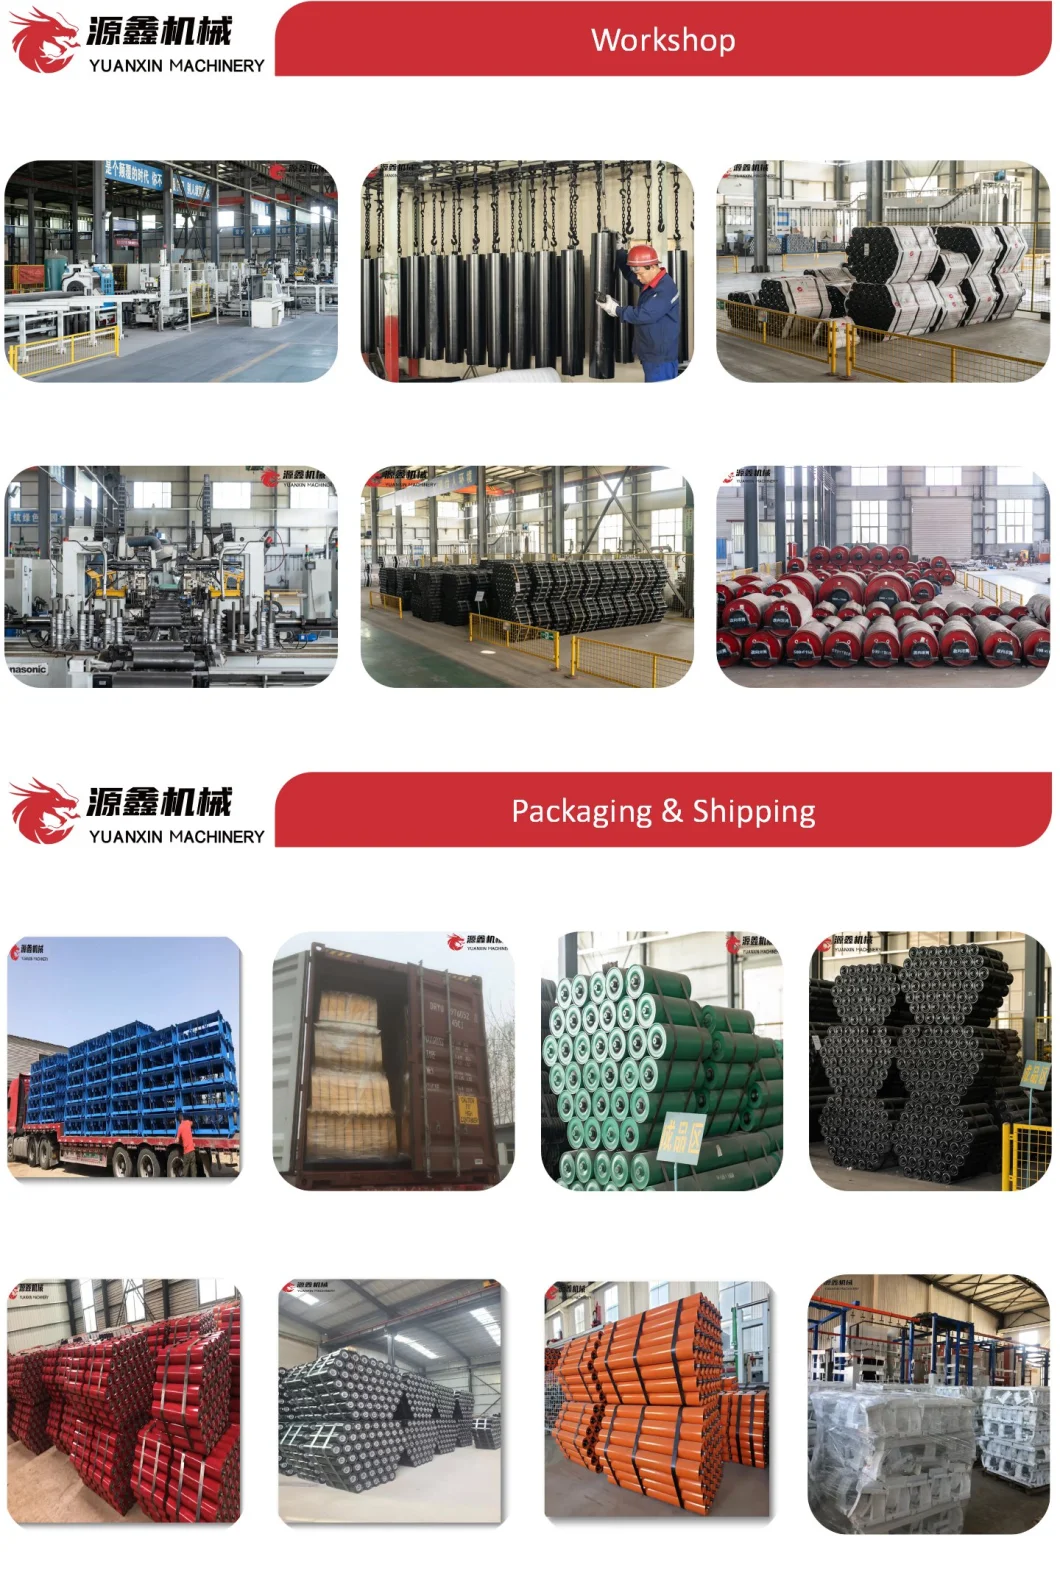 Conveyor Rollers/Steel Idler/Plastic Roller, Rubber Disc Roller, Impact Cushion Roller, Return Roller with Rubber Disc